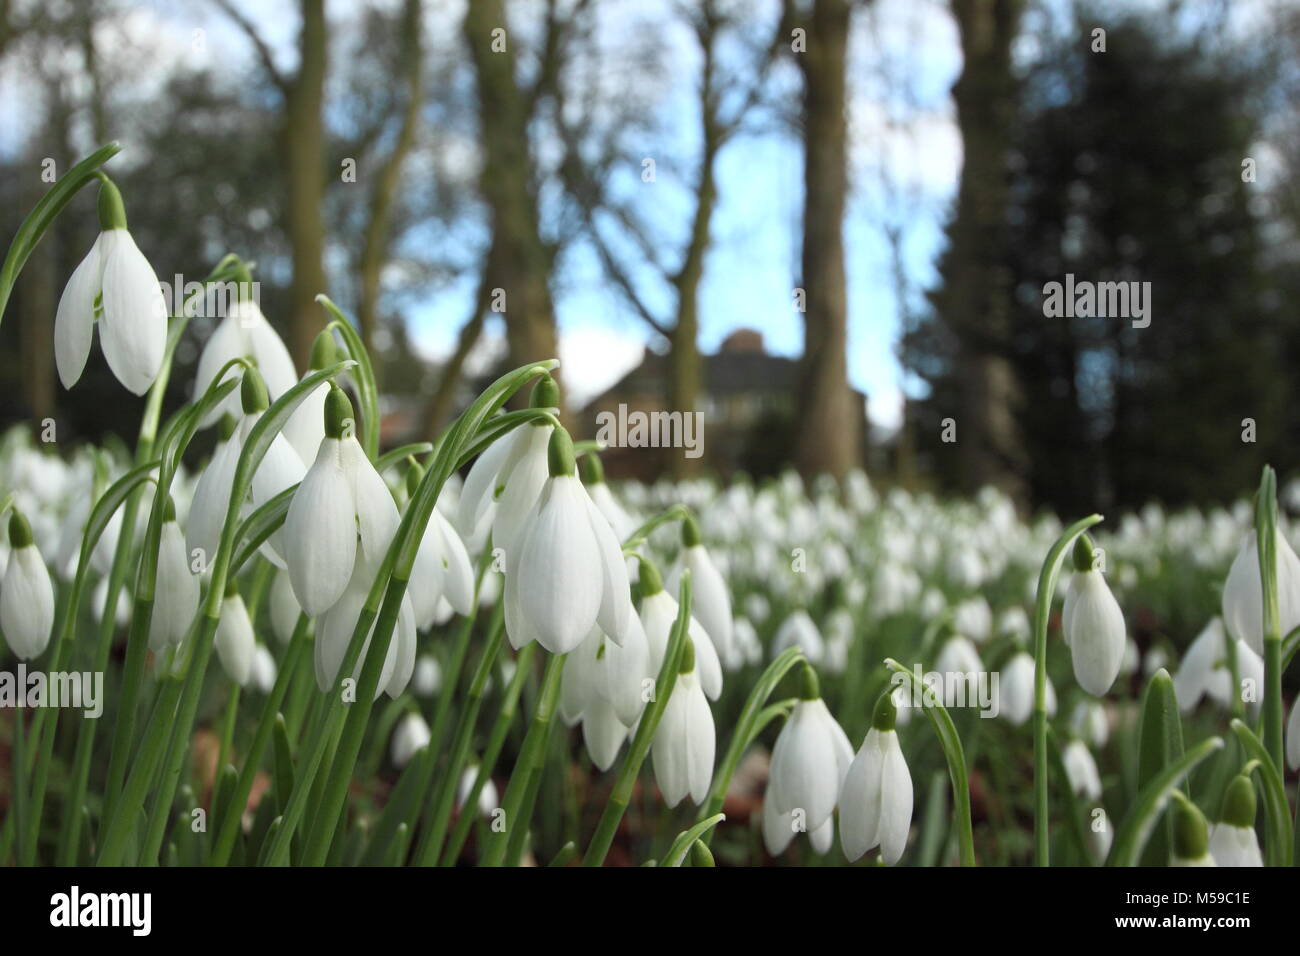 Snowdrops (galanthus nivalis) in the woodland garden at Hopton Hall, Derbyshire during the annual open garden event in February. UK Stock Photo